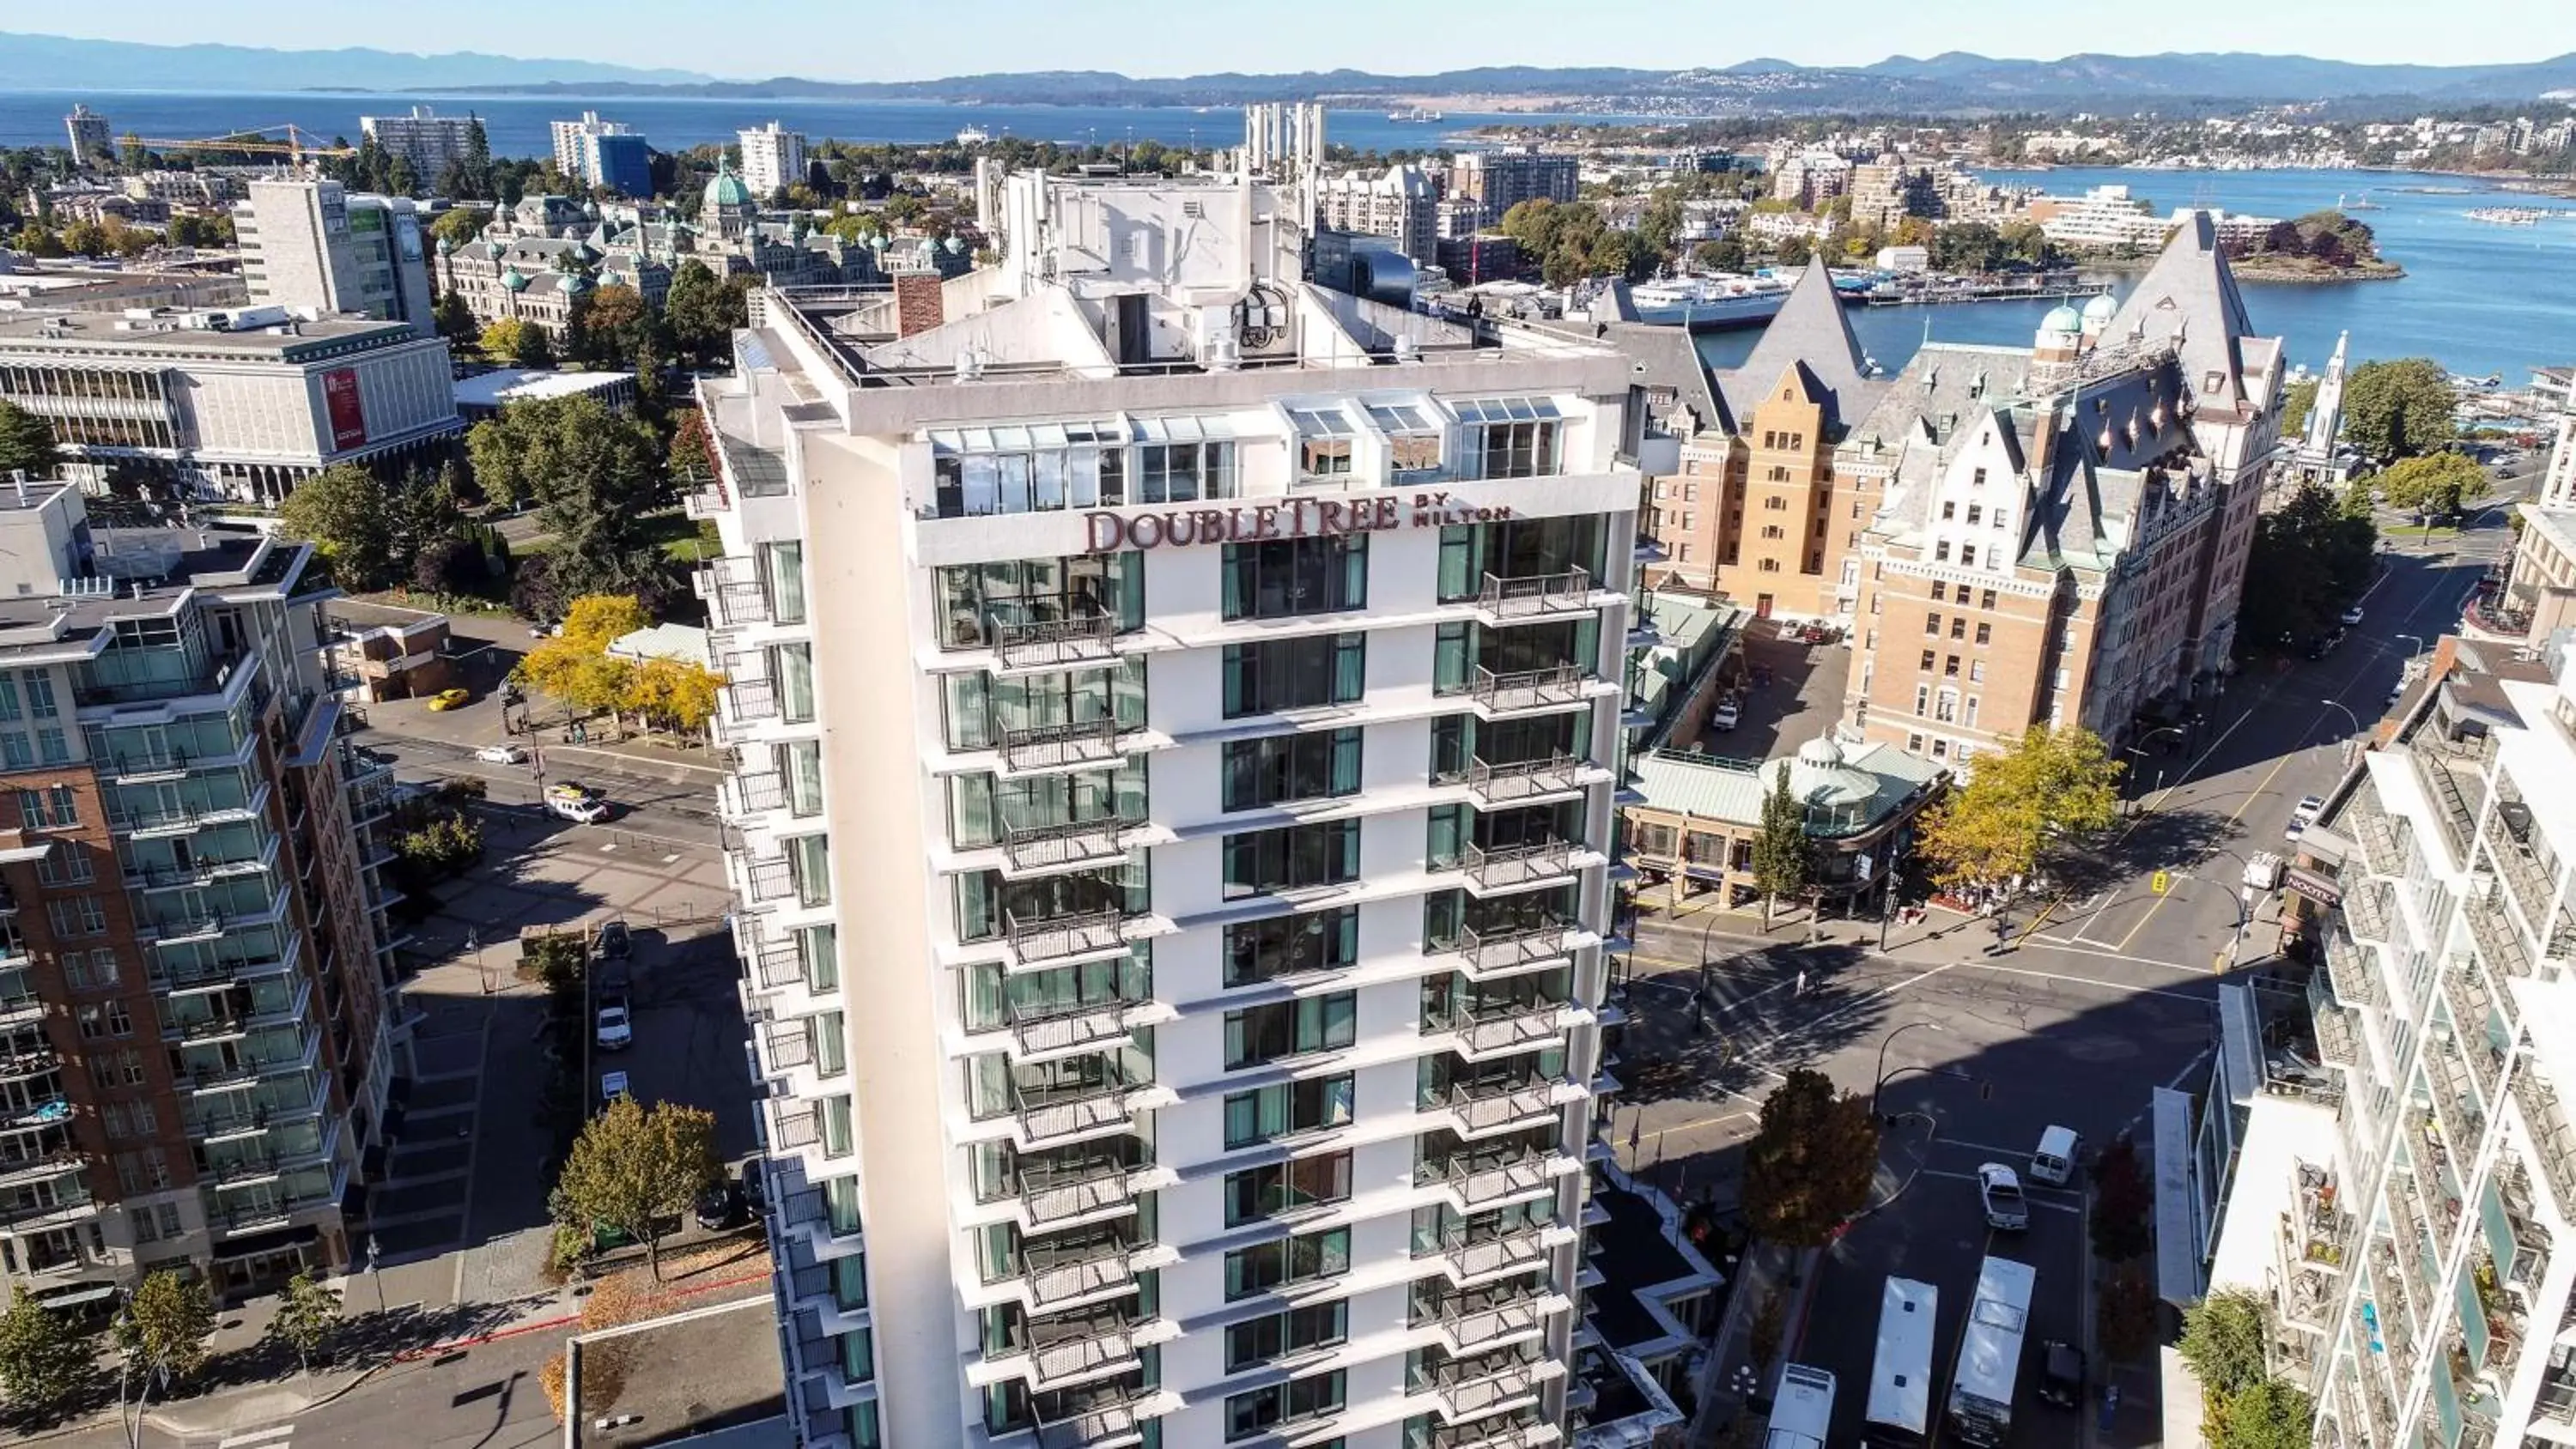 Property building, Bird's-eye View in DoubleTree by Hilton Hotel & Suites Victoria